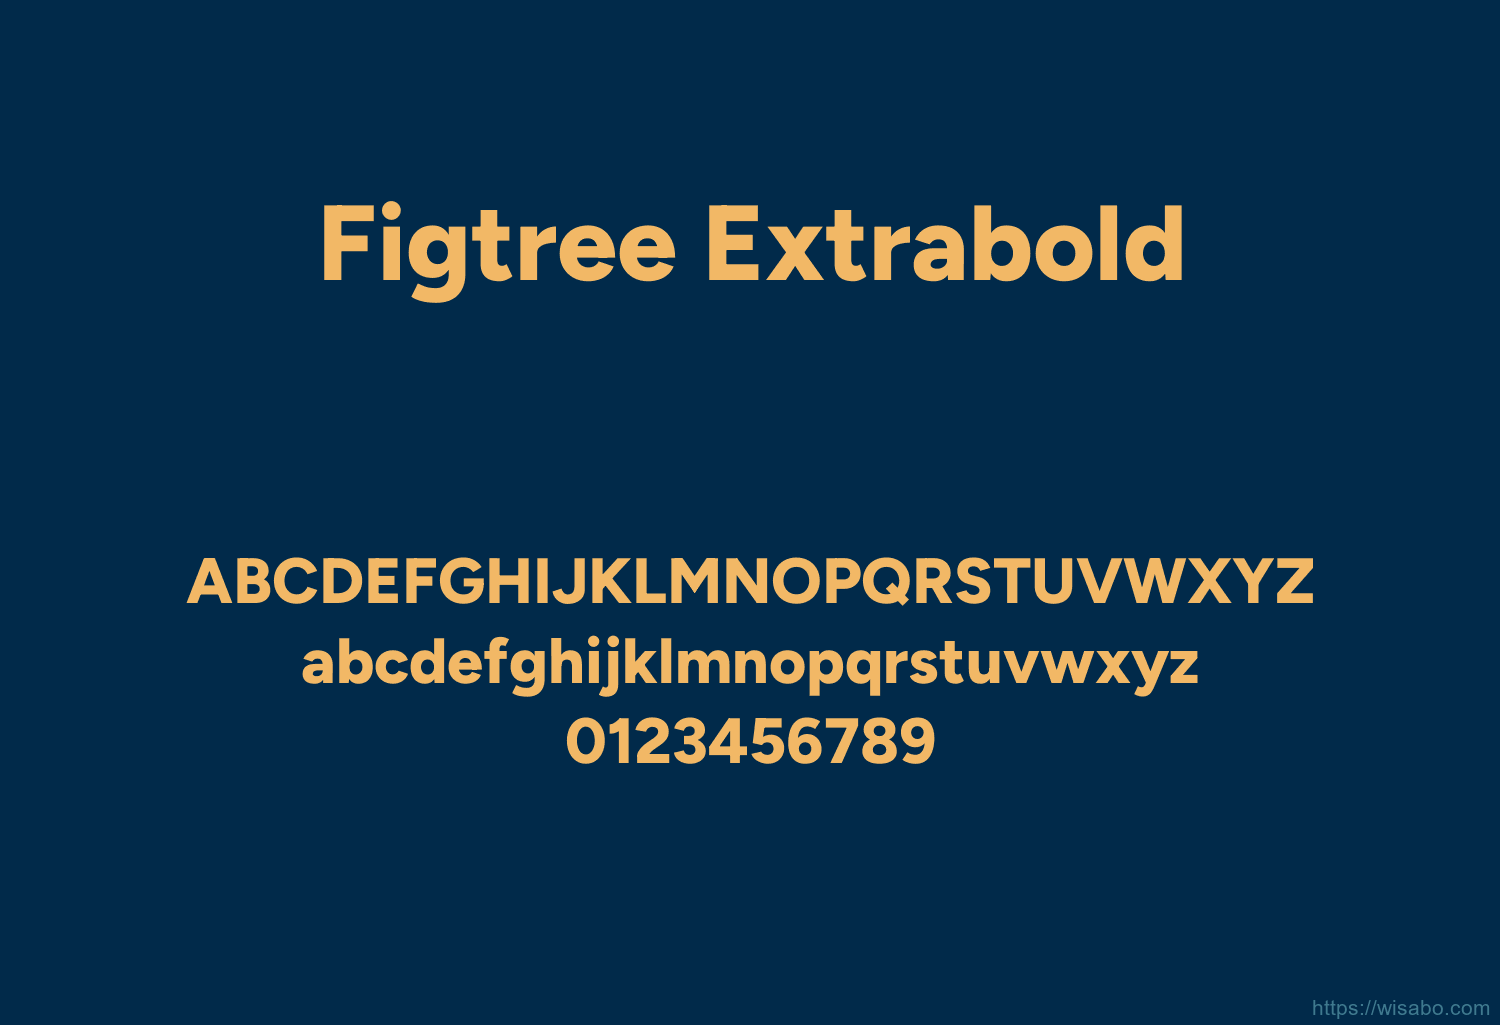 Figtree Extrabold